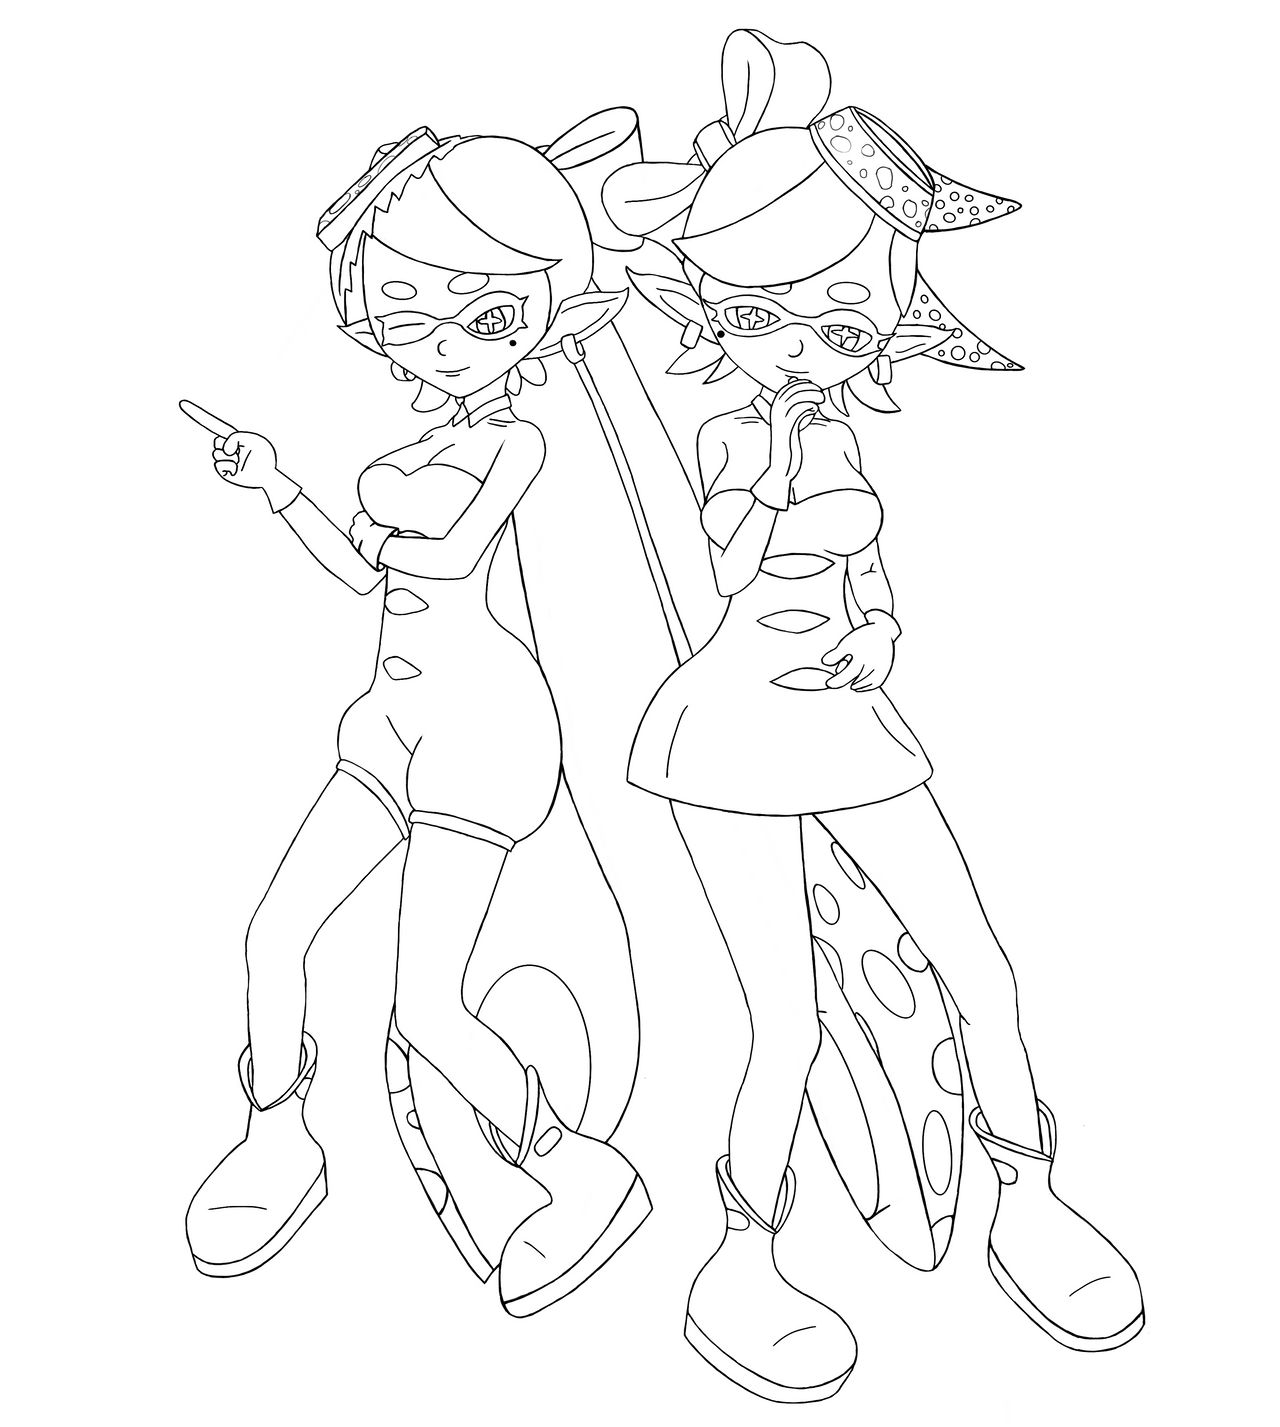 Squid Sisters Live (outline) by MinyBoy5 on DeviantArt